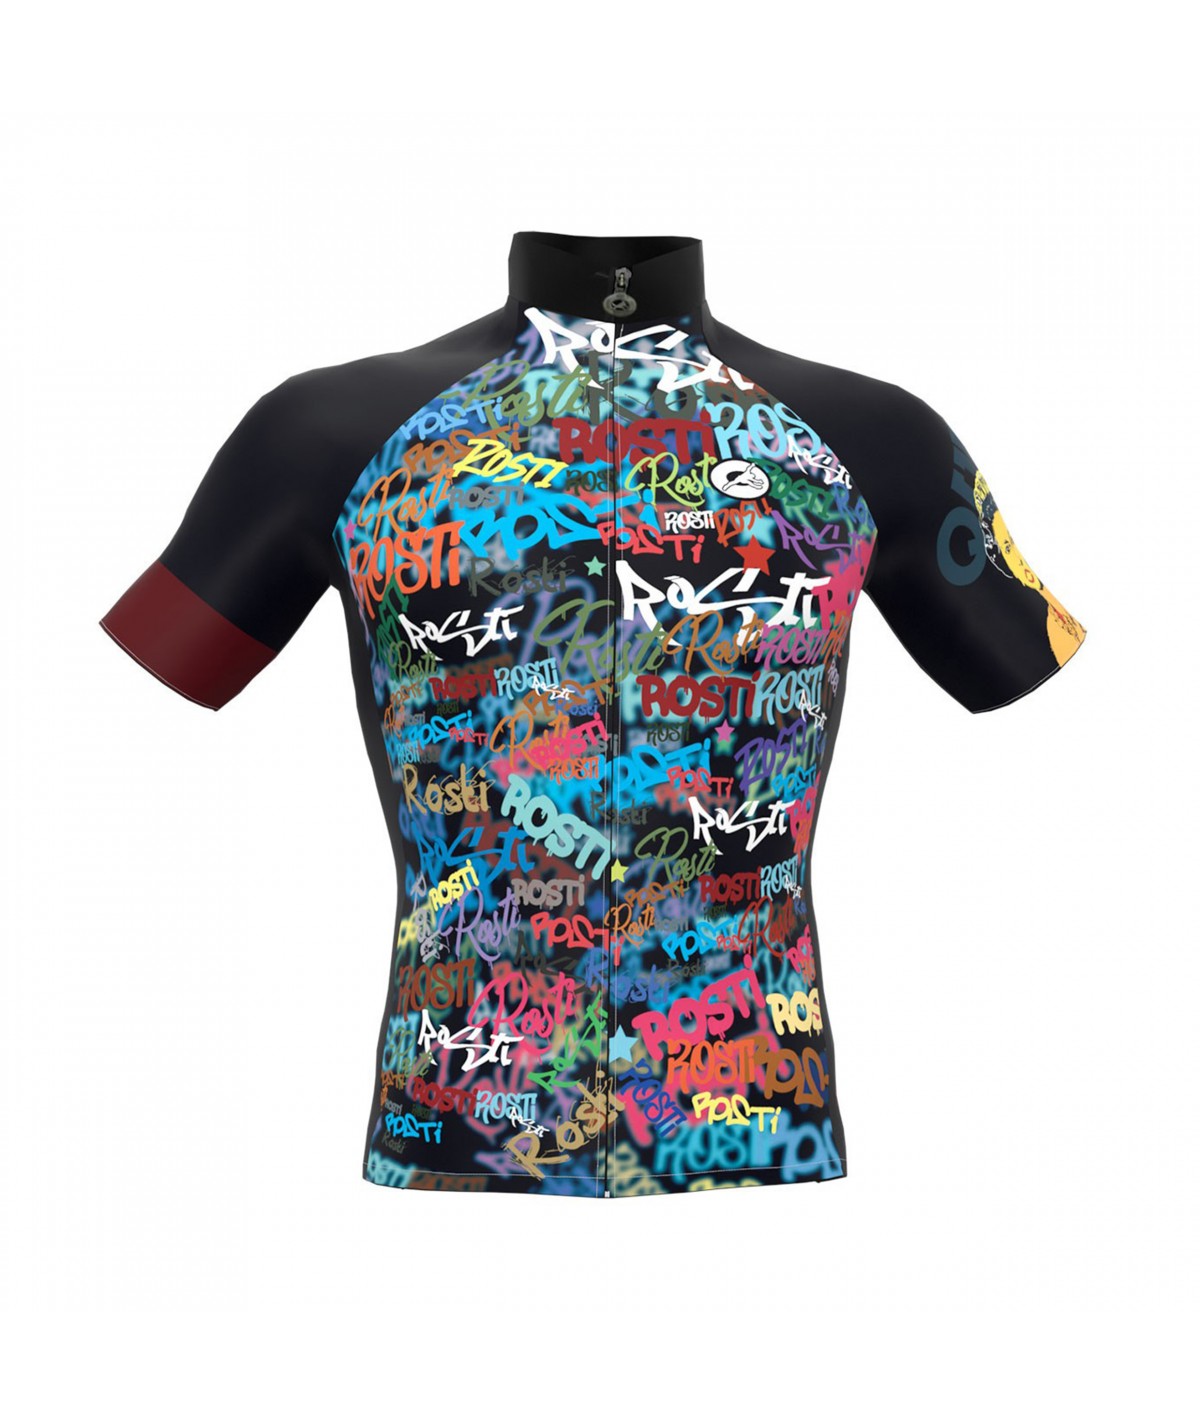 Queen cycling jersey from Rosti France